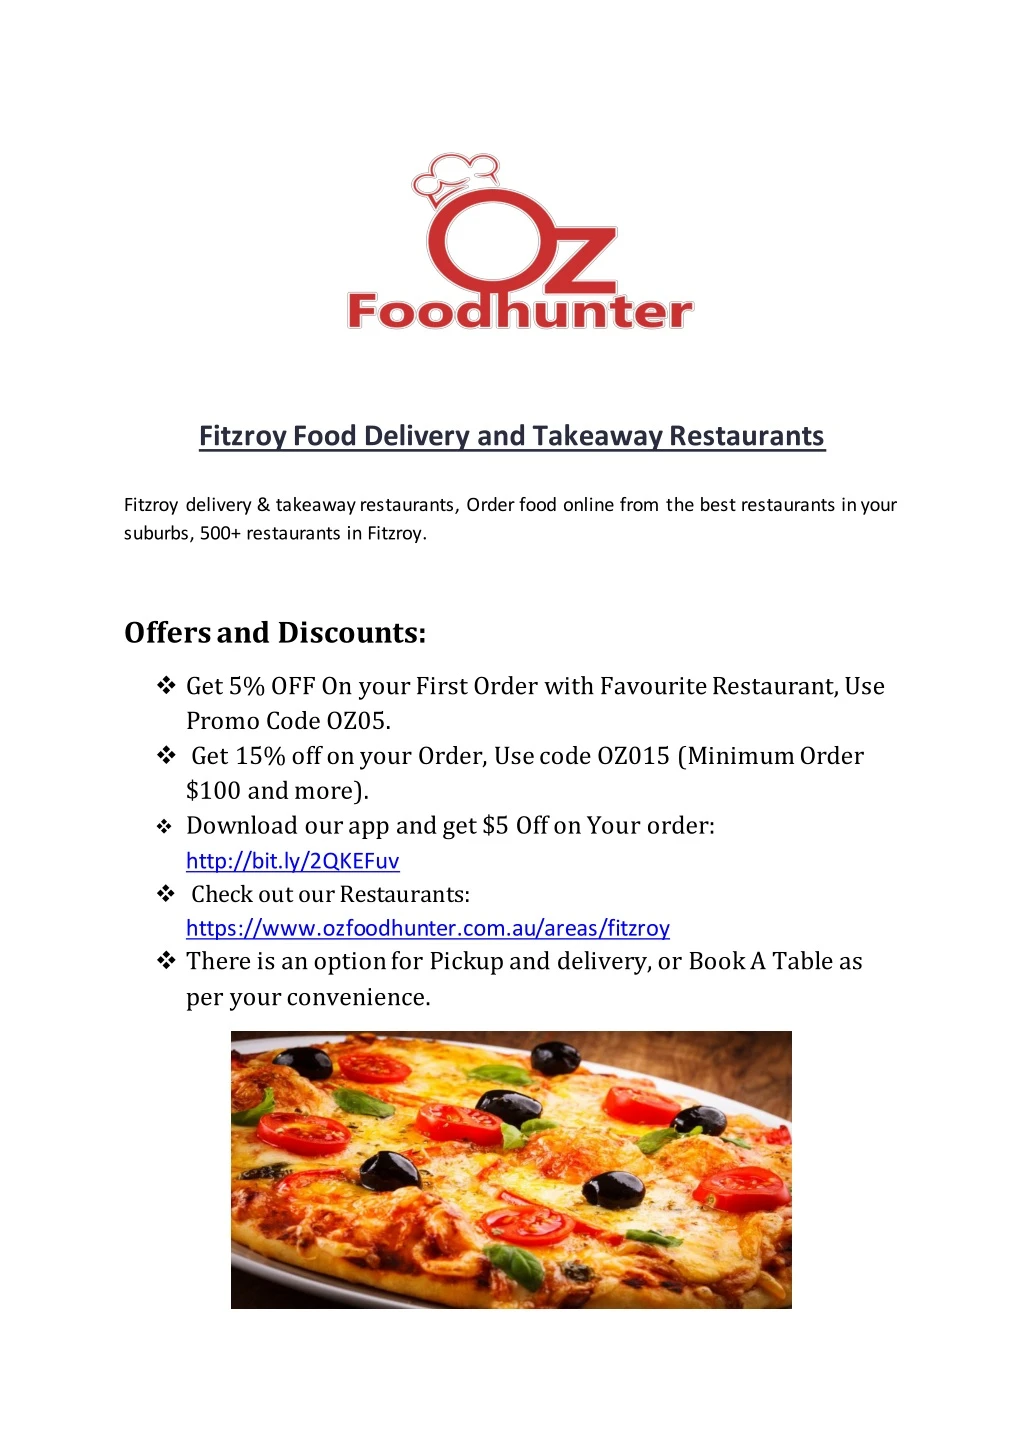 fitzroy food delivery and takeaway restaurants